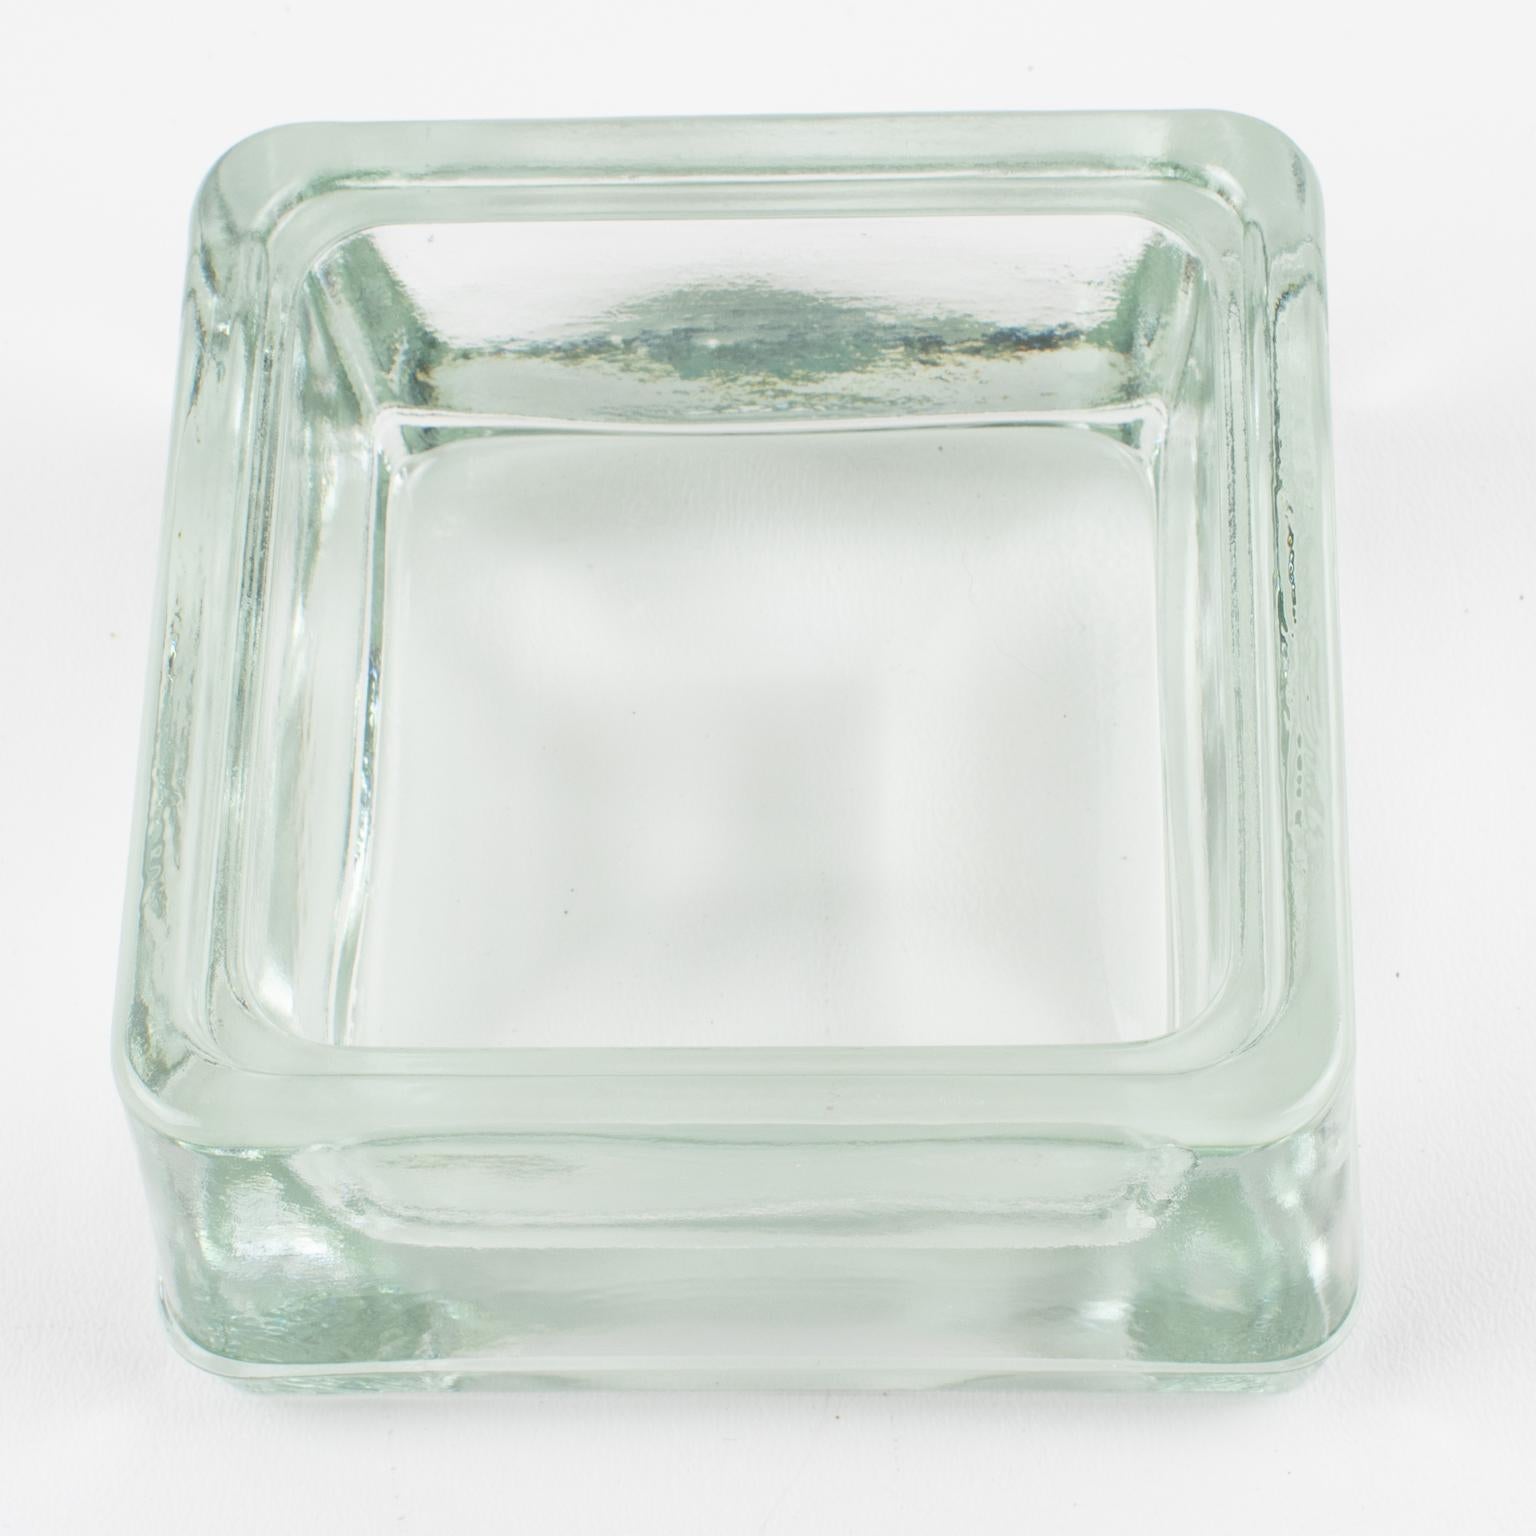 This industrial thick molded glass desktop accessory, desk tidy, ashtray, or catchall, was manufactured by Lumax, France, in the 1950s. Original design by Le Corbusier. This lovely vide poche will add a touch of vintage modernism to any contemporary